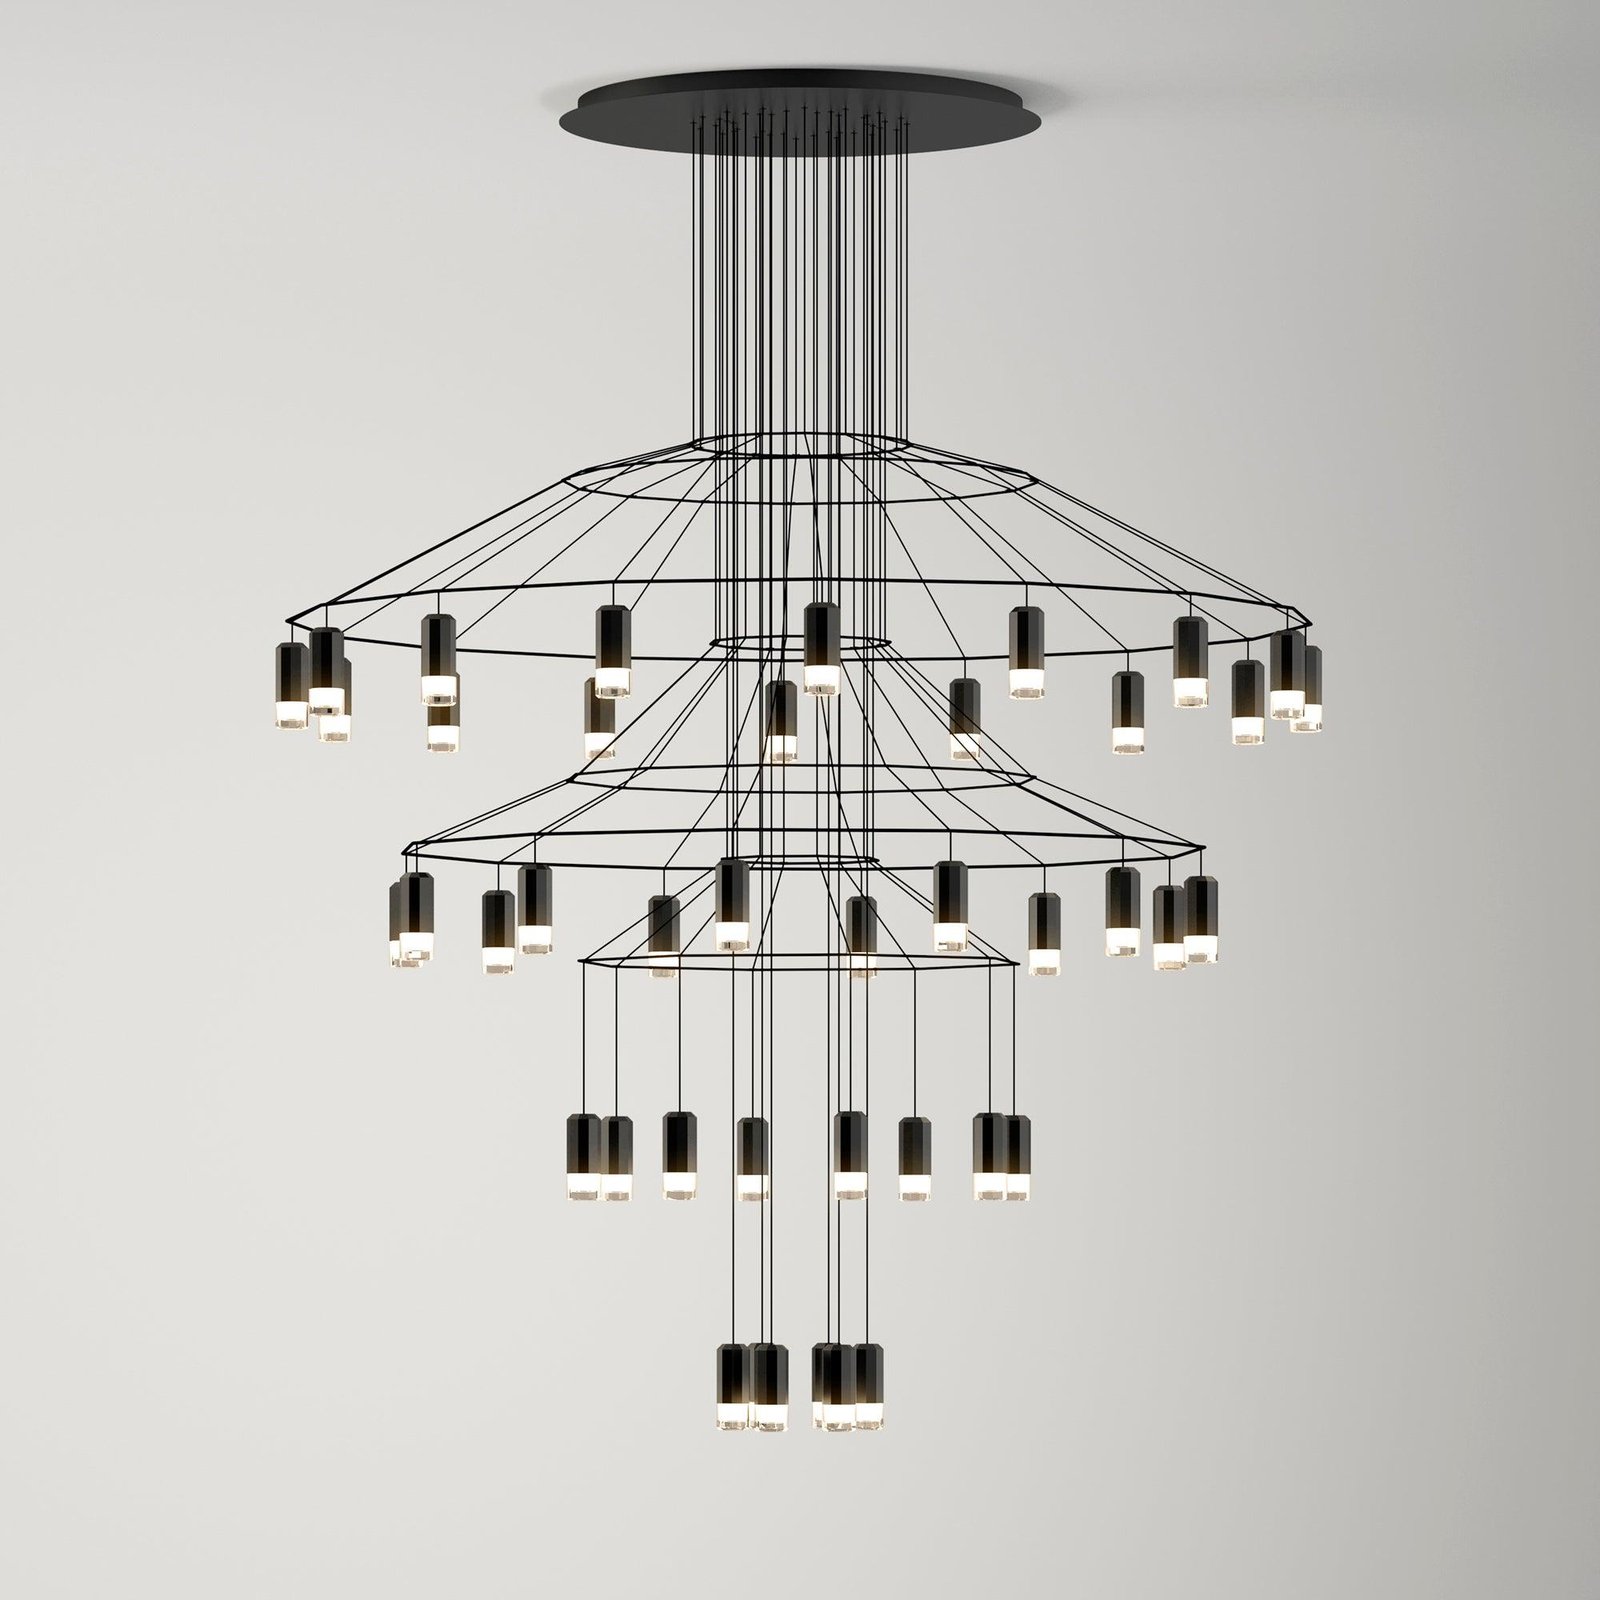 Black Lines Chandelier with 46 Heads, Diameter 35.4 inches x Height 78.7 inches (90cm x 200cm)